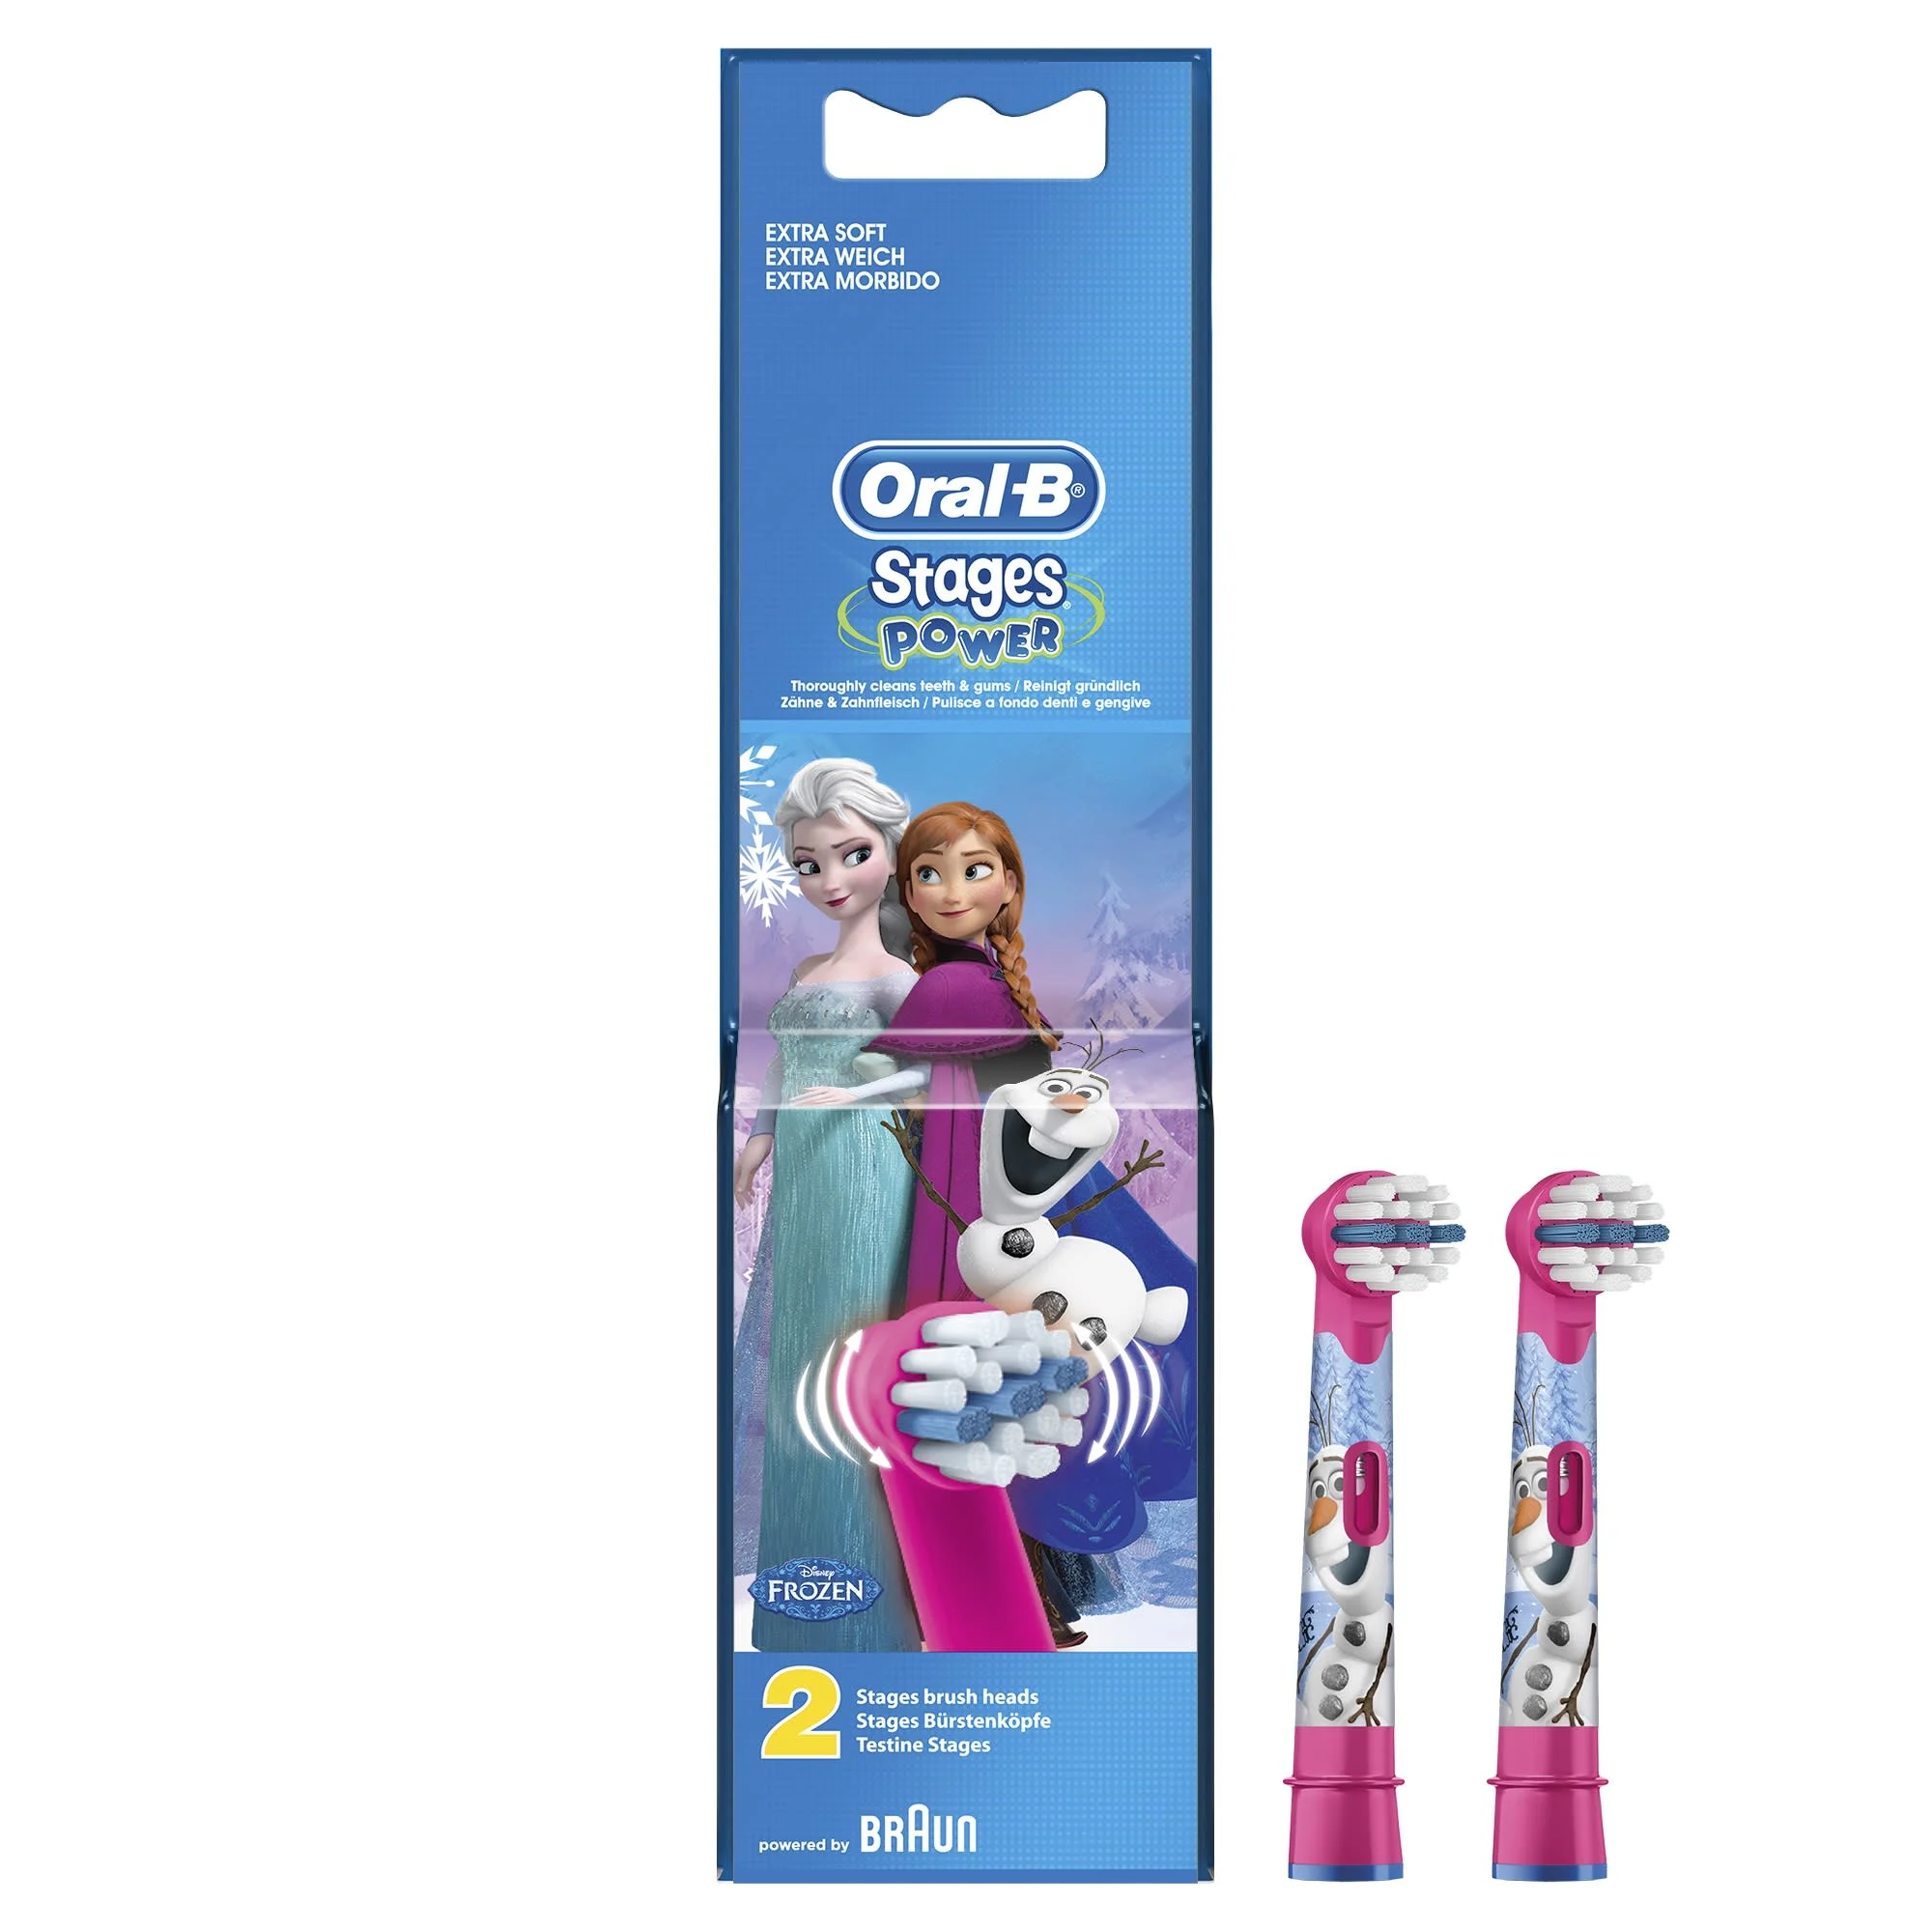 Oral-B Kids Electric Rechargeable Toothbrush Heads Replacement Refills Featuring Disney Frozen Characters - Pack of 2 undefined